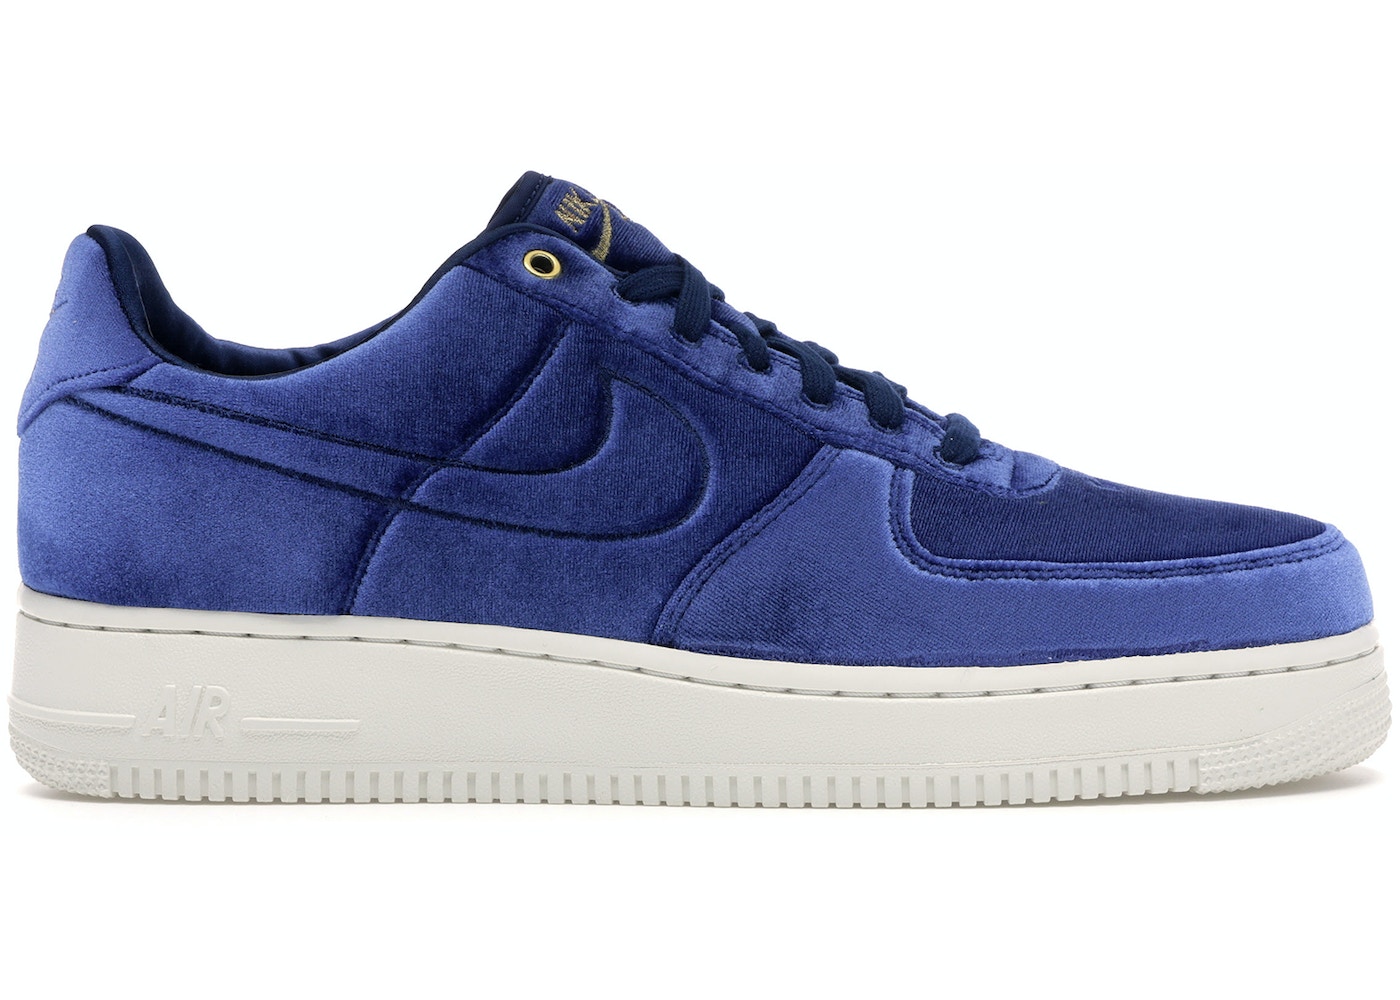 Nike Air Force 1 Low Premium 3 Velour Blue Void AT4144400